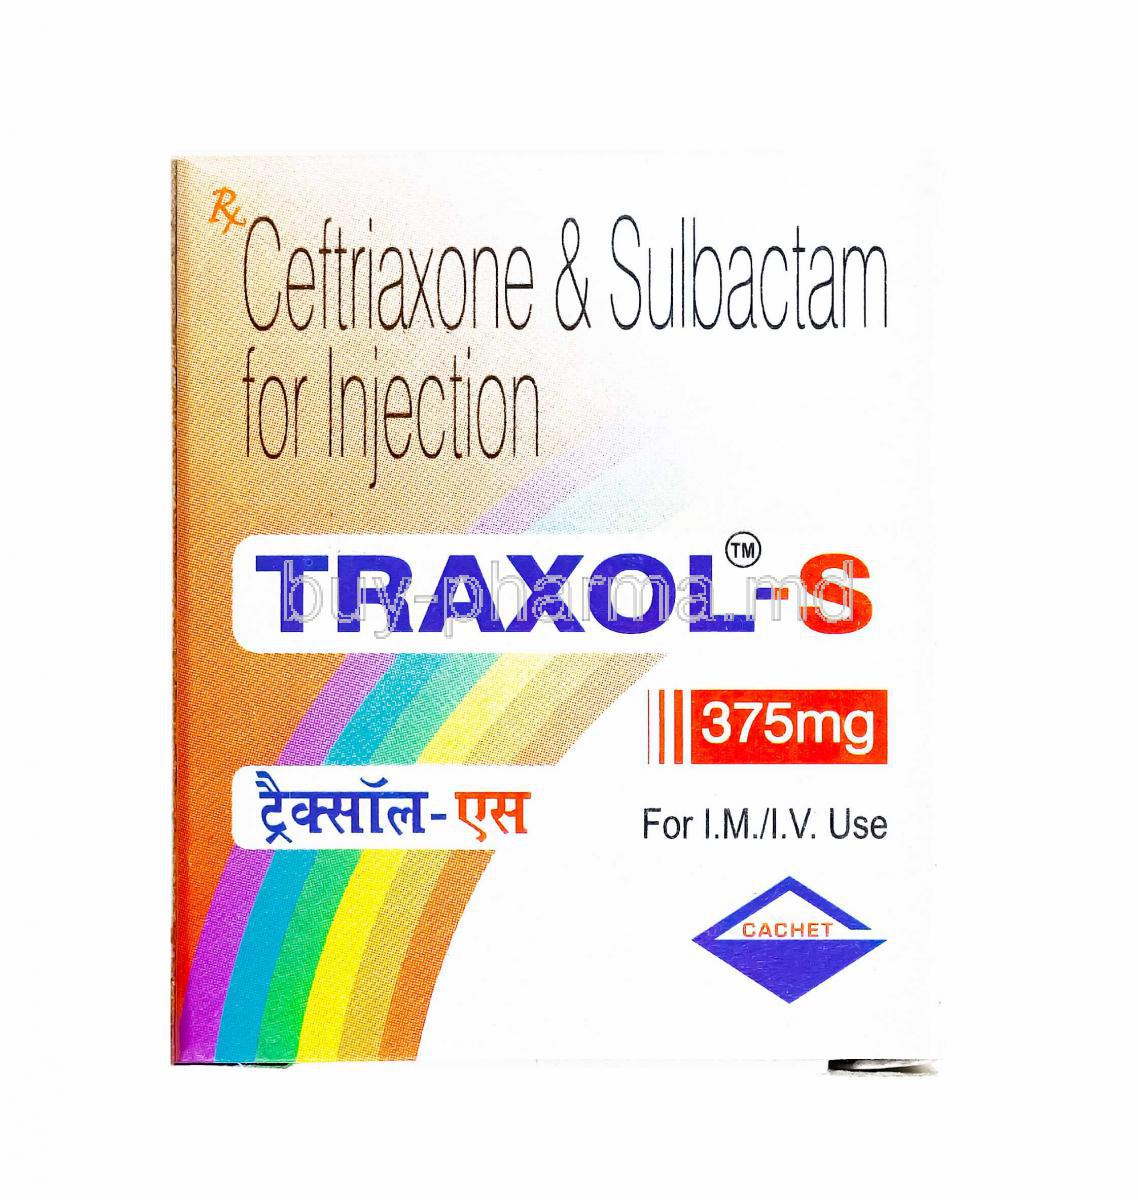 Traxol S Injection, Ceftriaxone and Sulbactam